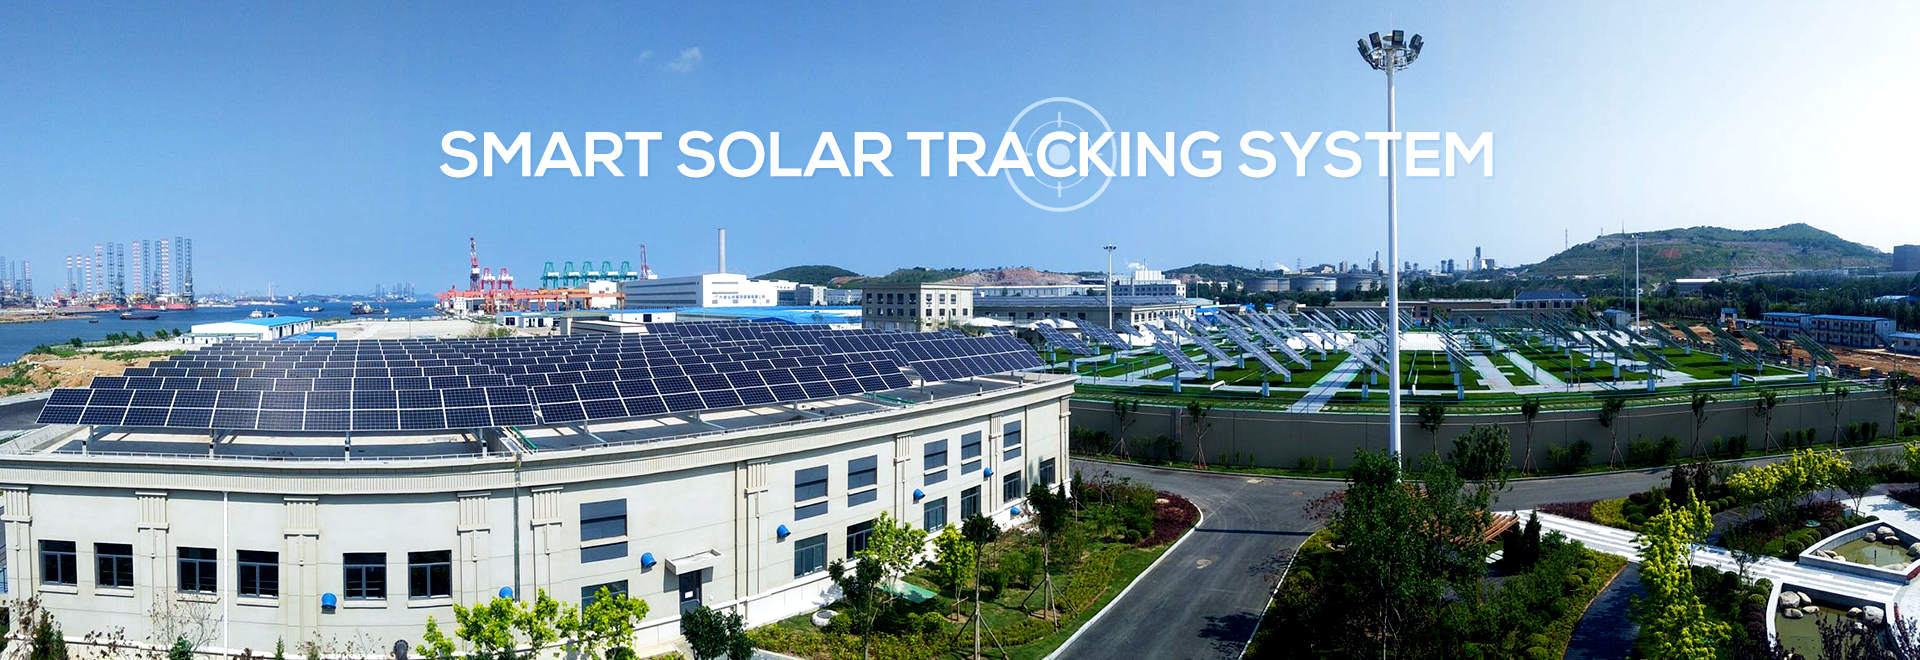 PV Tracker, Sun Tracking System, PV Tracking System - Zhaori